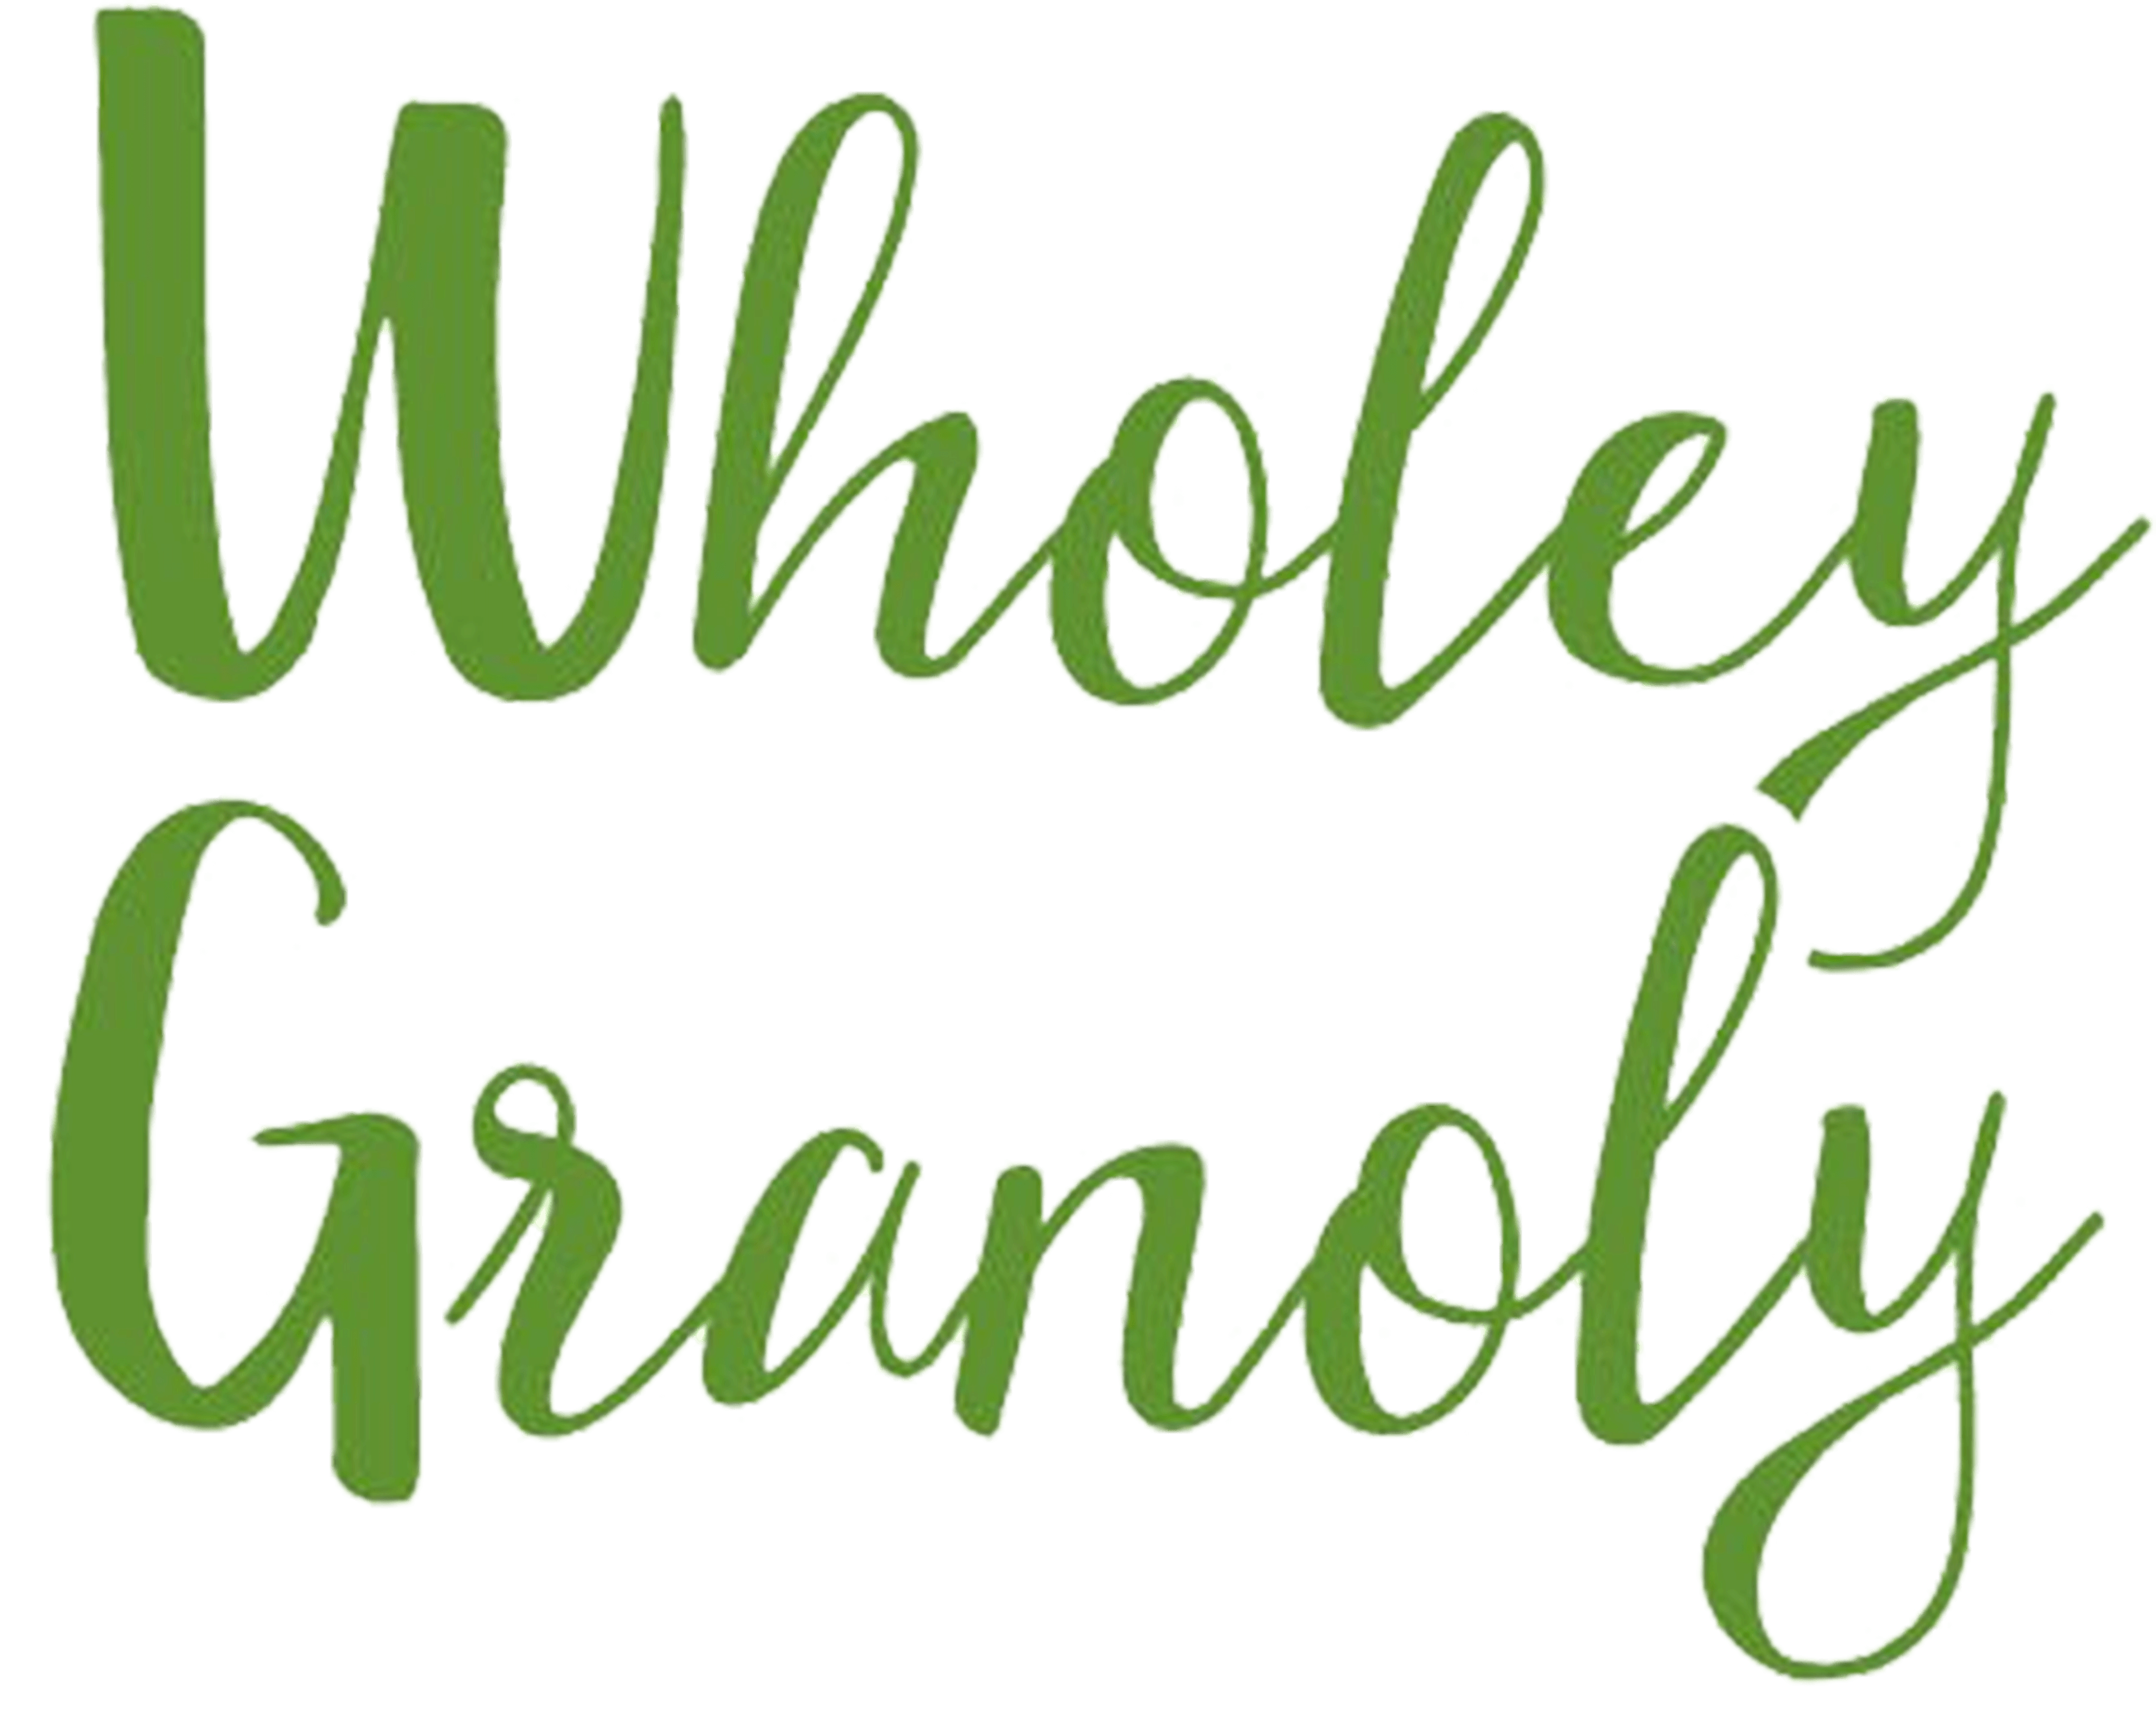 Wholey Granoly Home